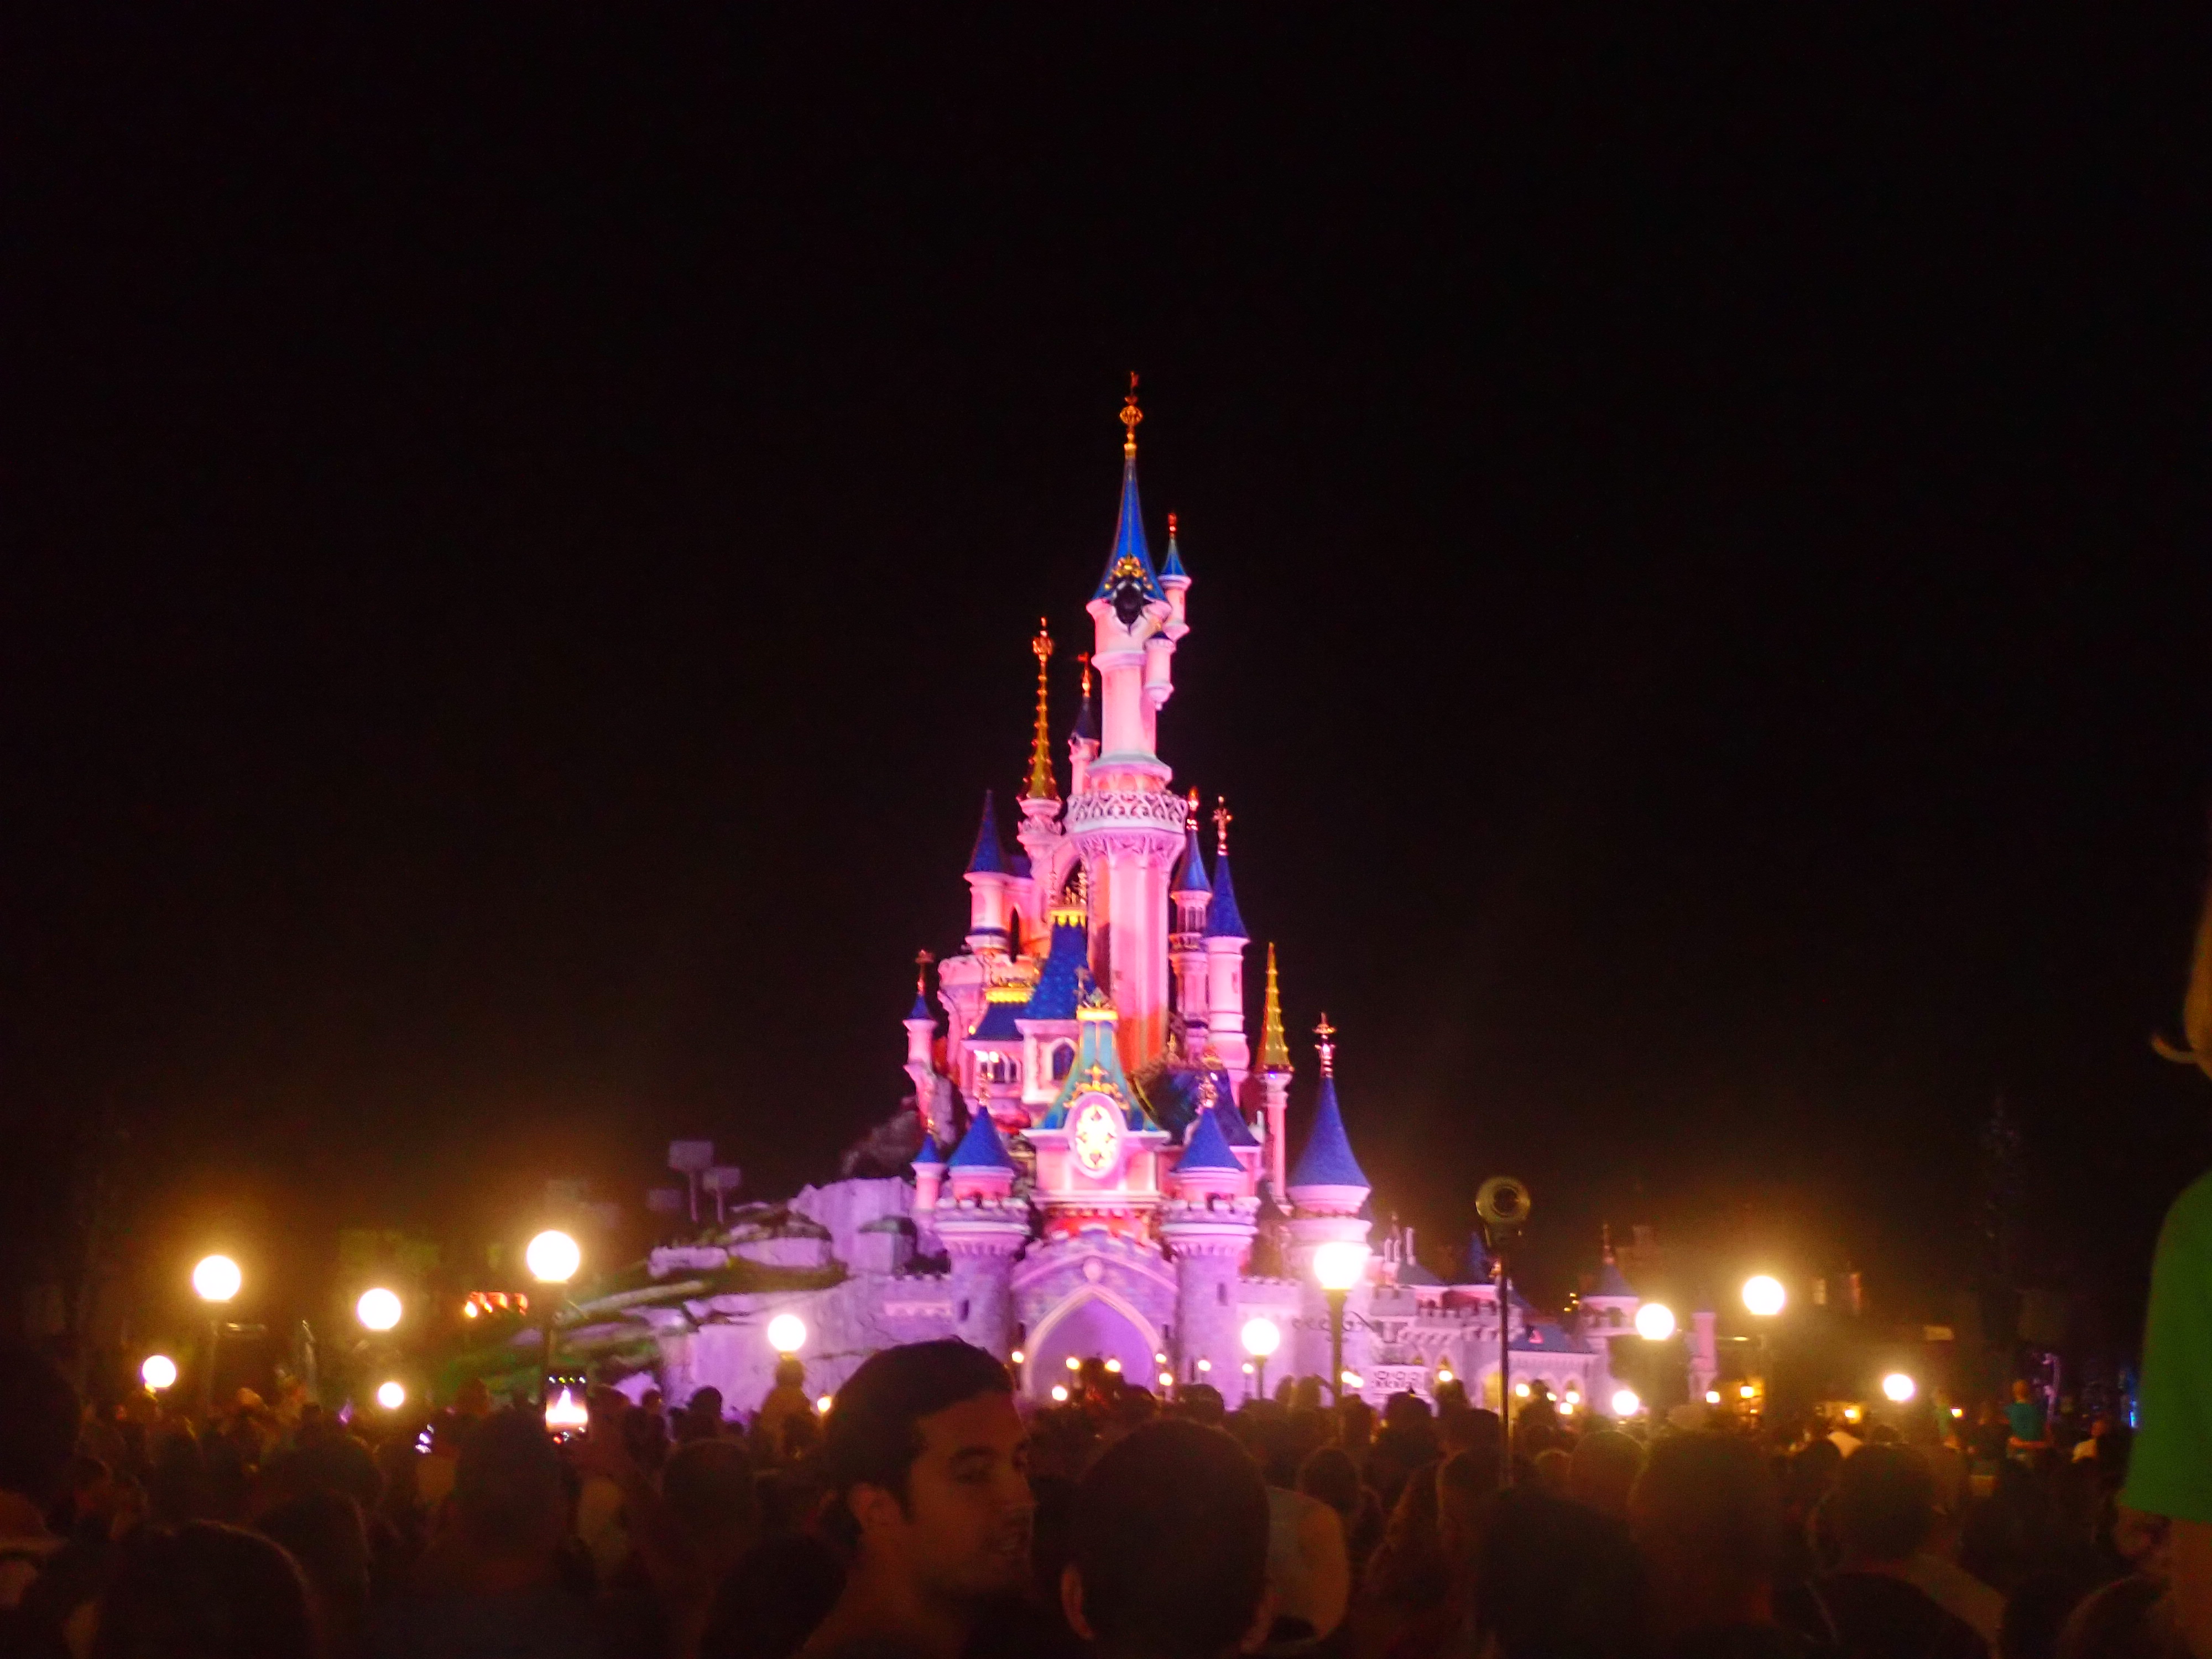 Disneyland Paris One Day Itinerary featured by top US Disney blogger, Marcie and the Mouse: The Disneyland Paris castle is all lit up at night during the Finale show